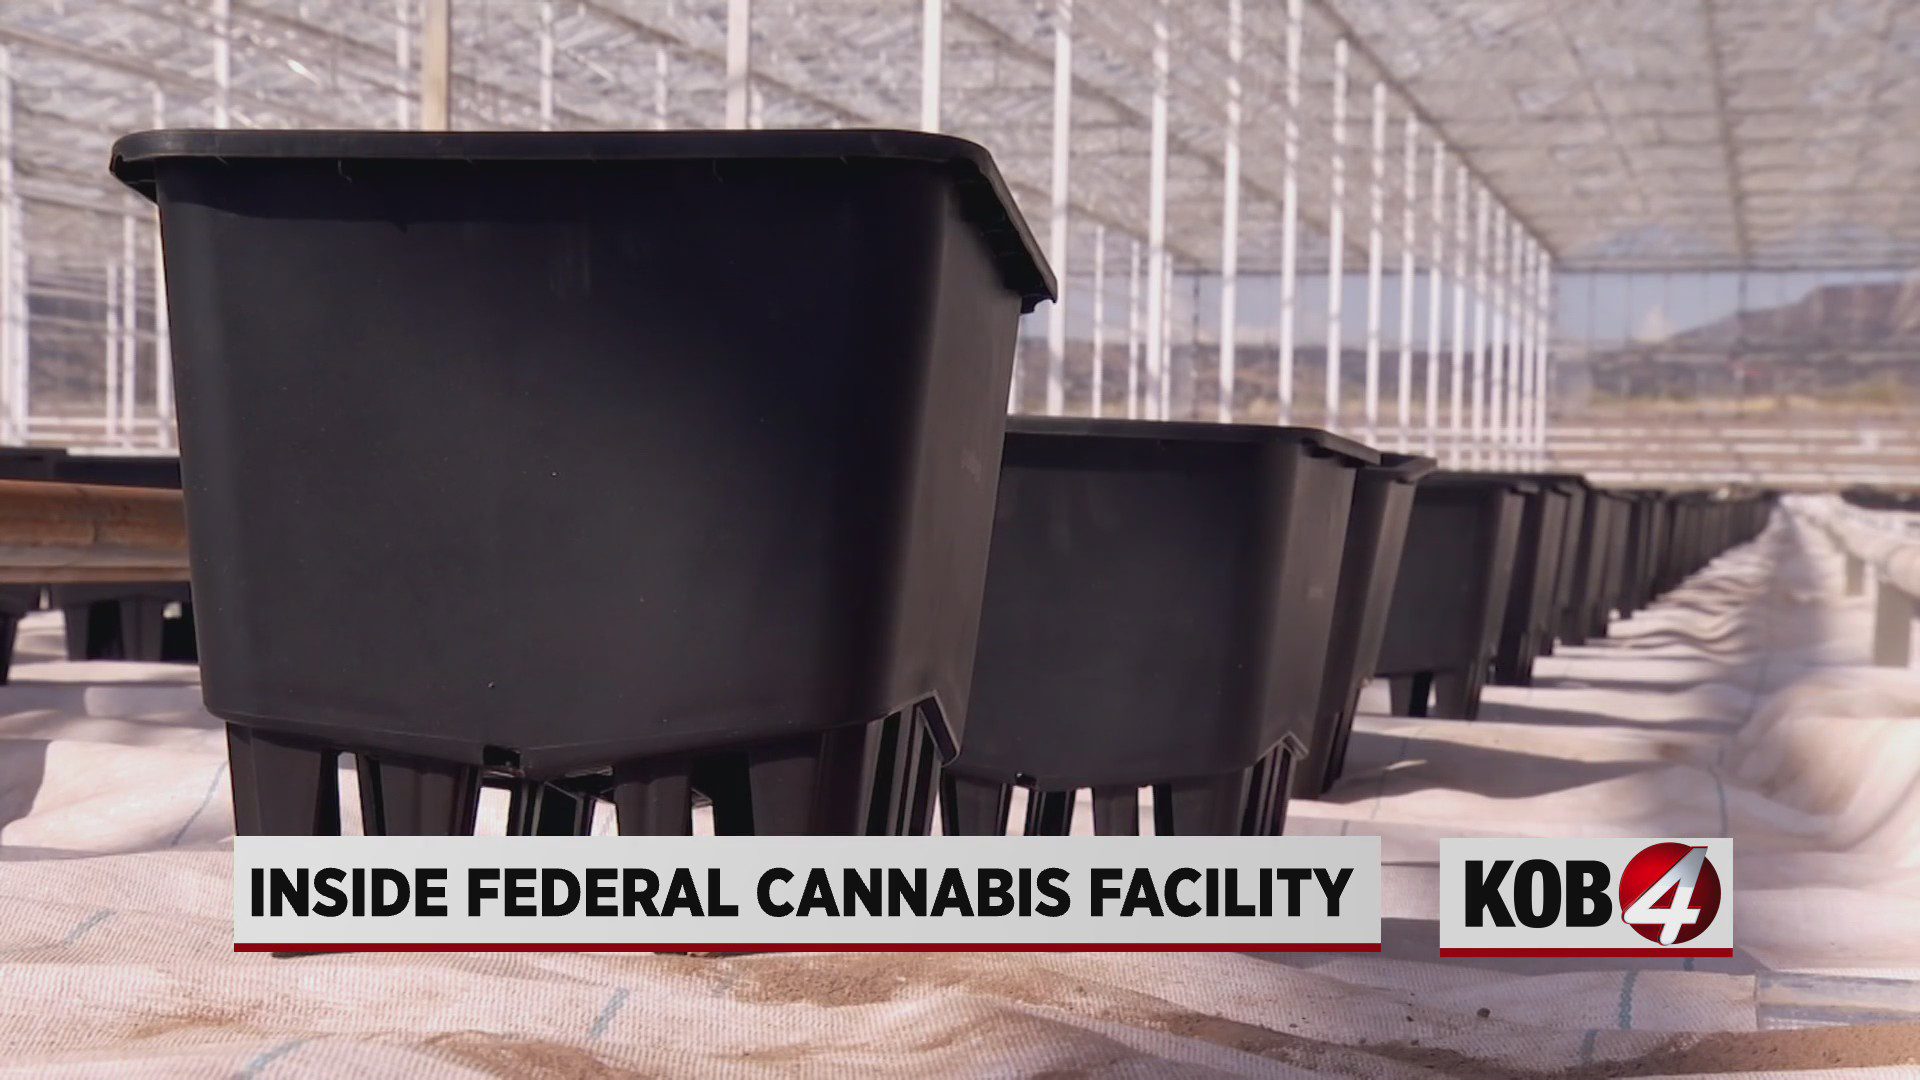 A look inside a federally-sanctioned marijuana grow operation in New Mexico